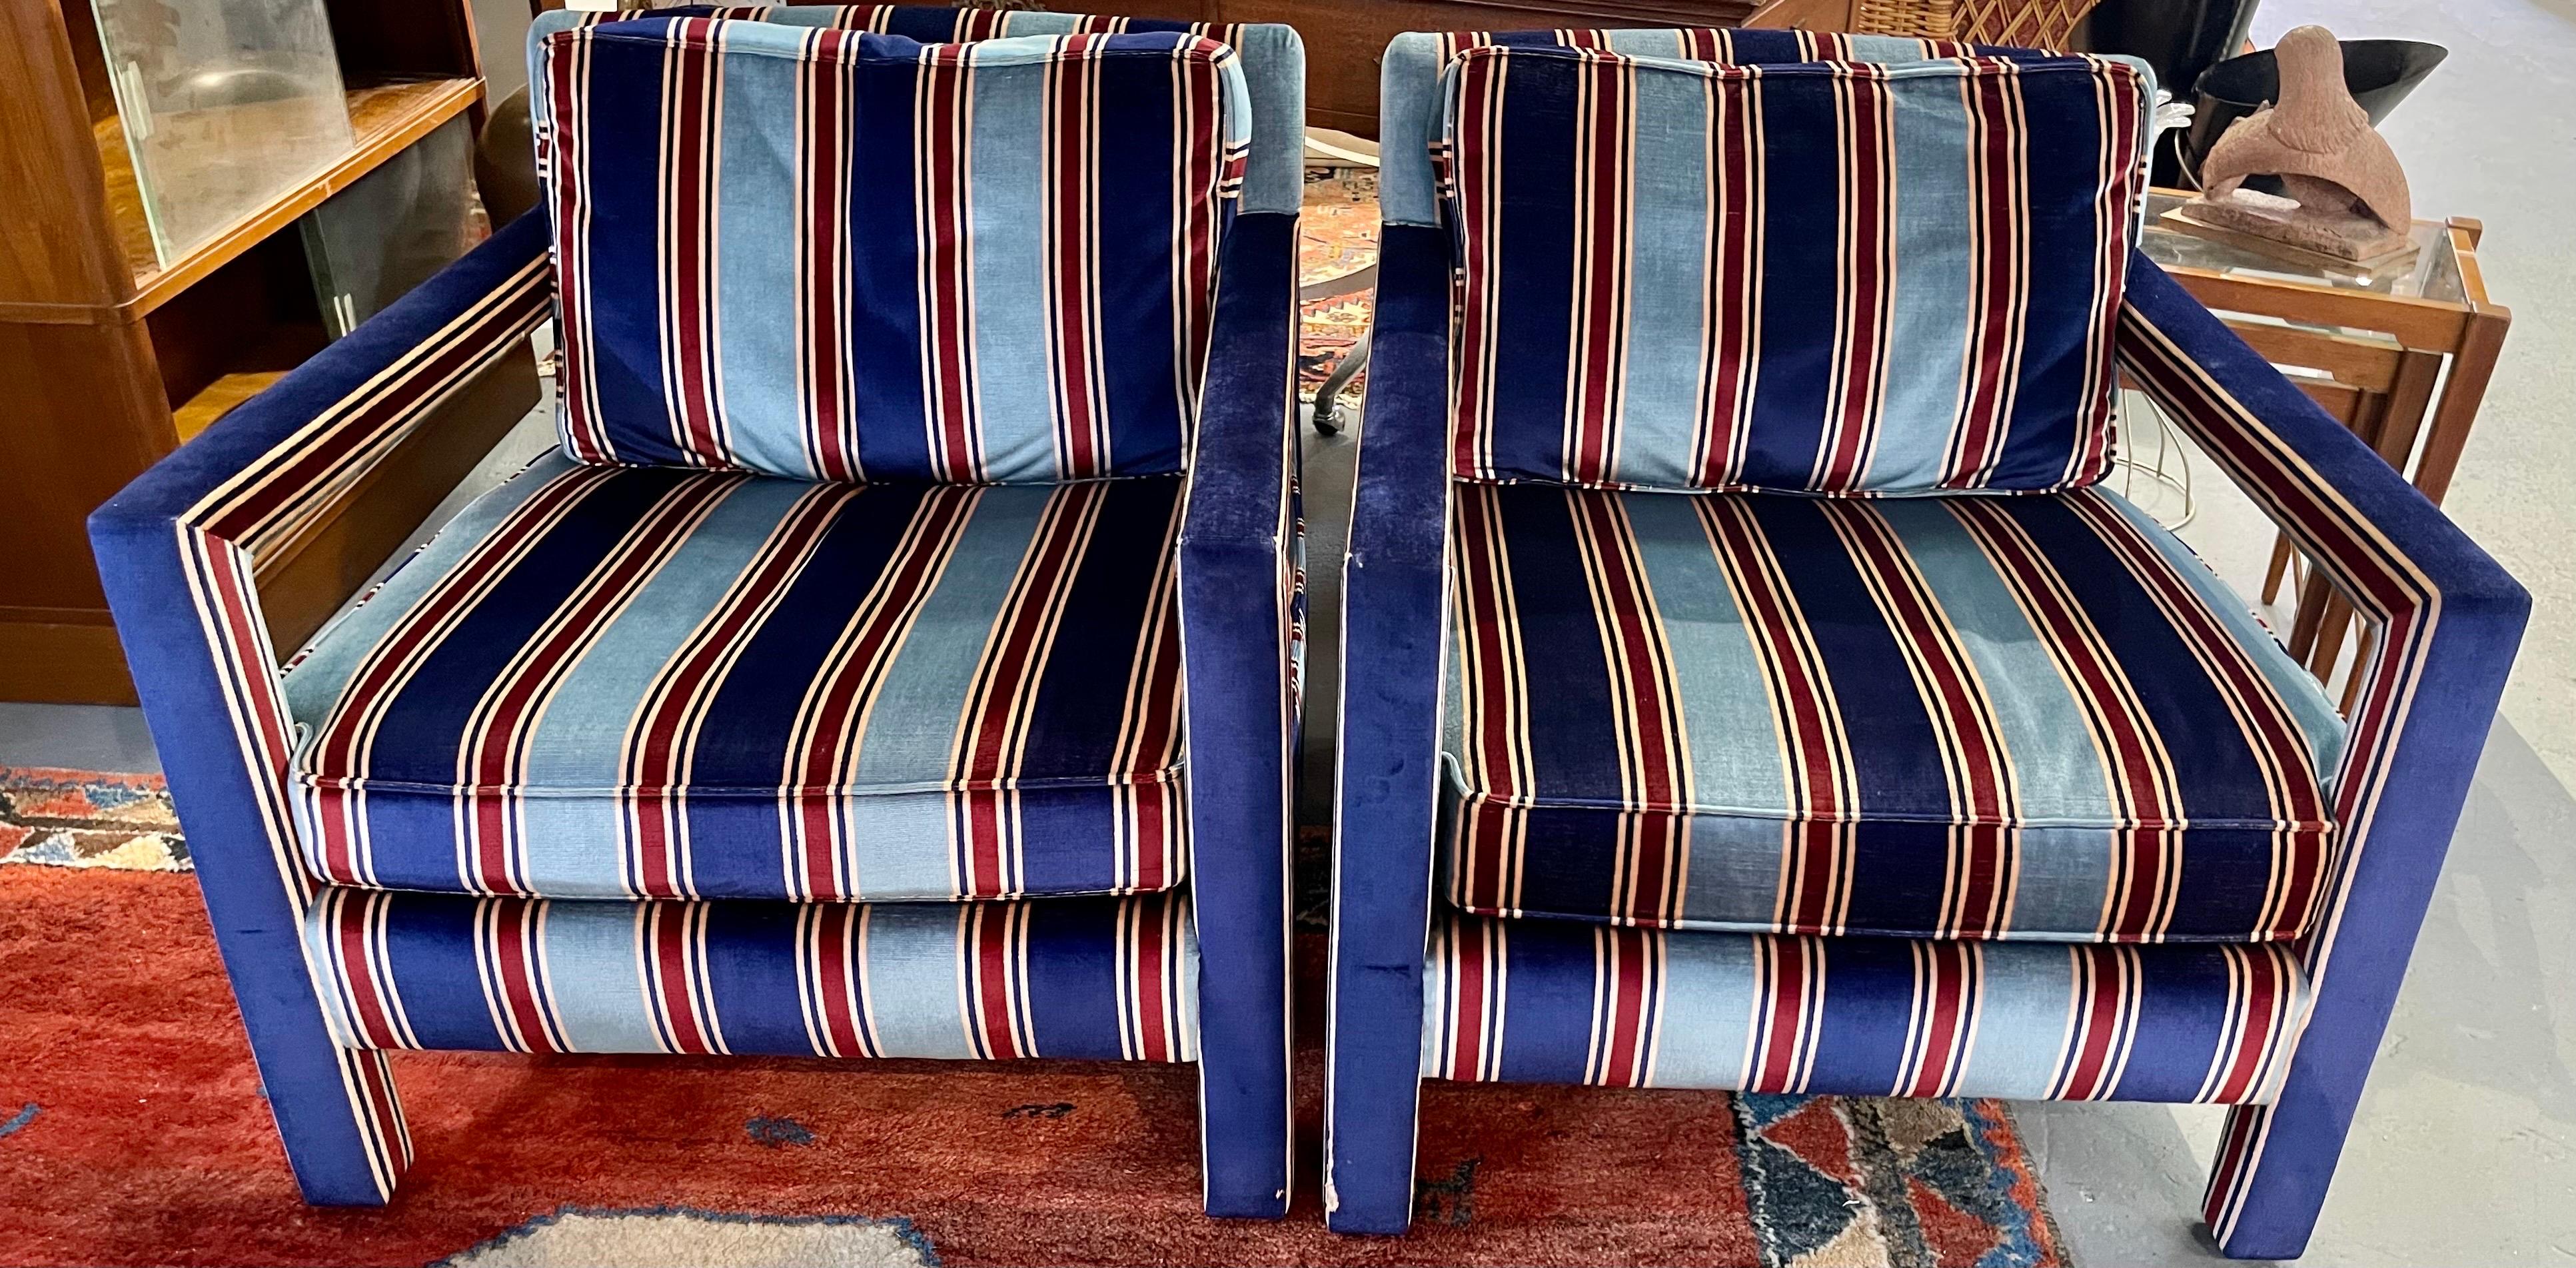 Iconic pair of fully upholstered striped arm chairs by Harvey Probber. Great scale, better lines and what a wonderful and vibrant color scheme on the mohair feeling fabric. Guaranteed to raise the design level in any room.